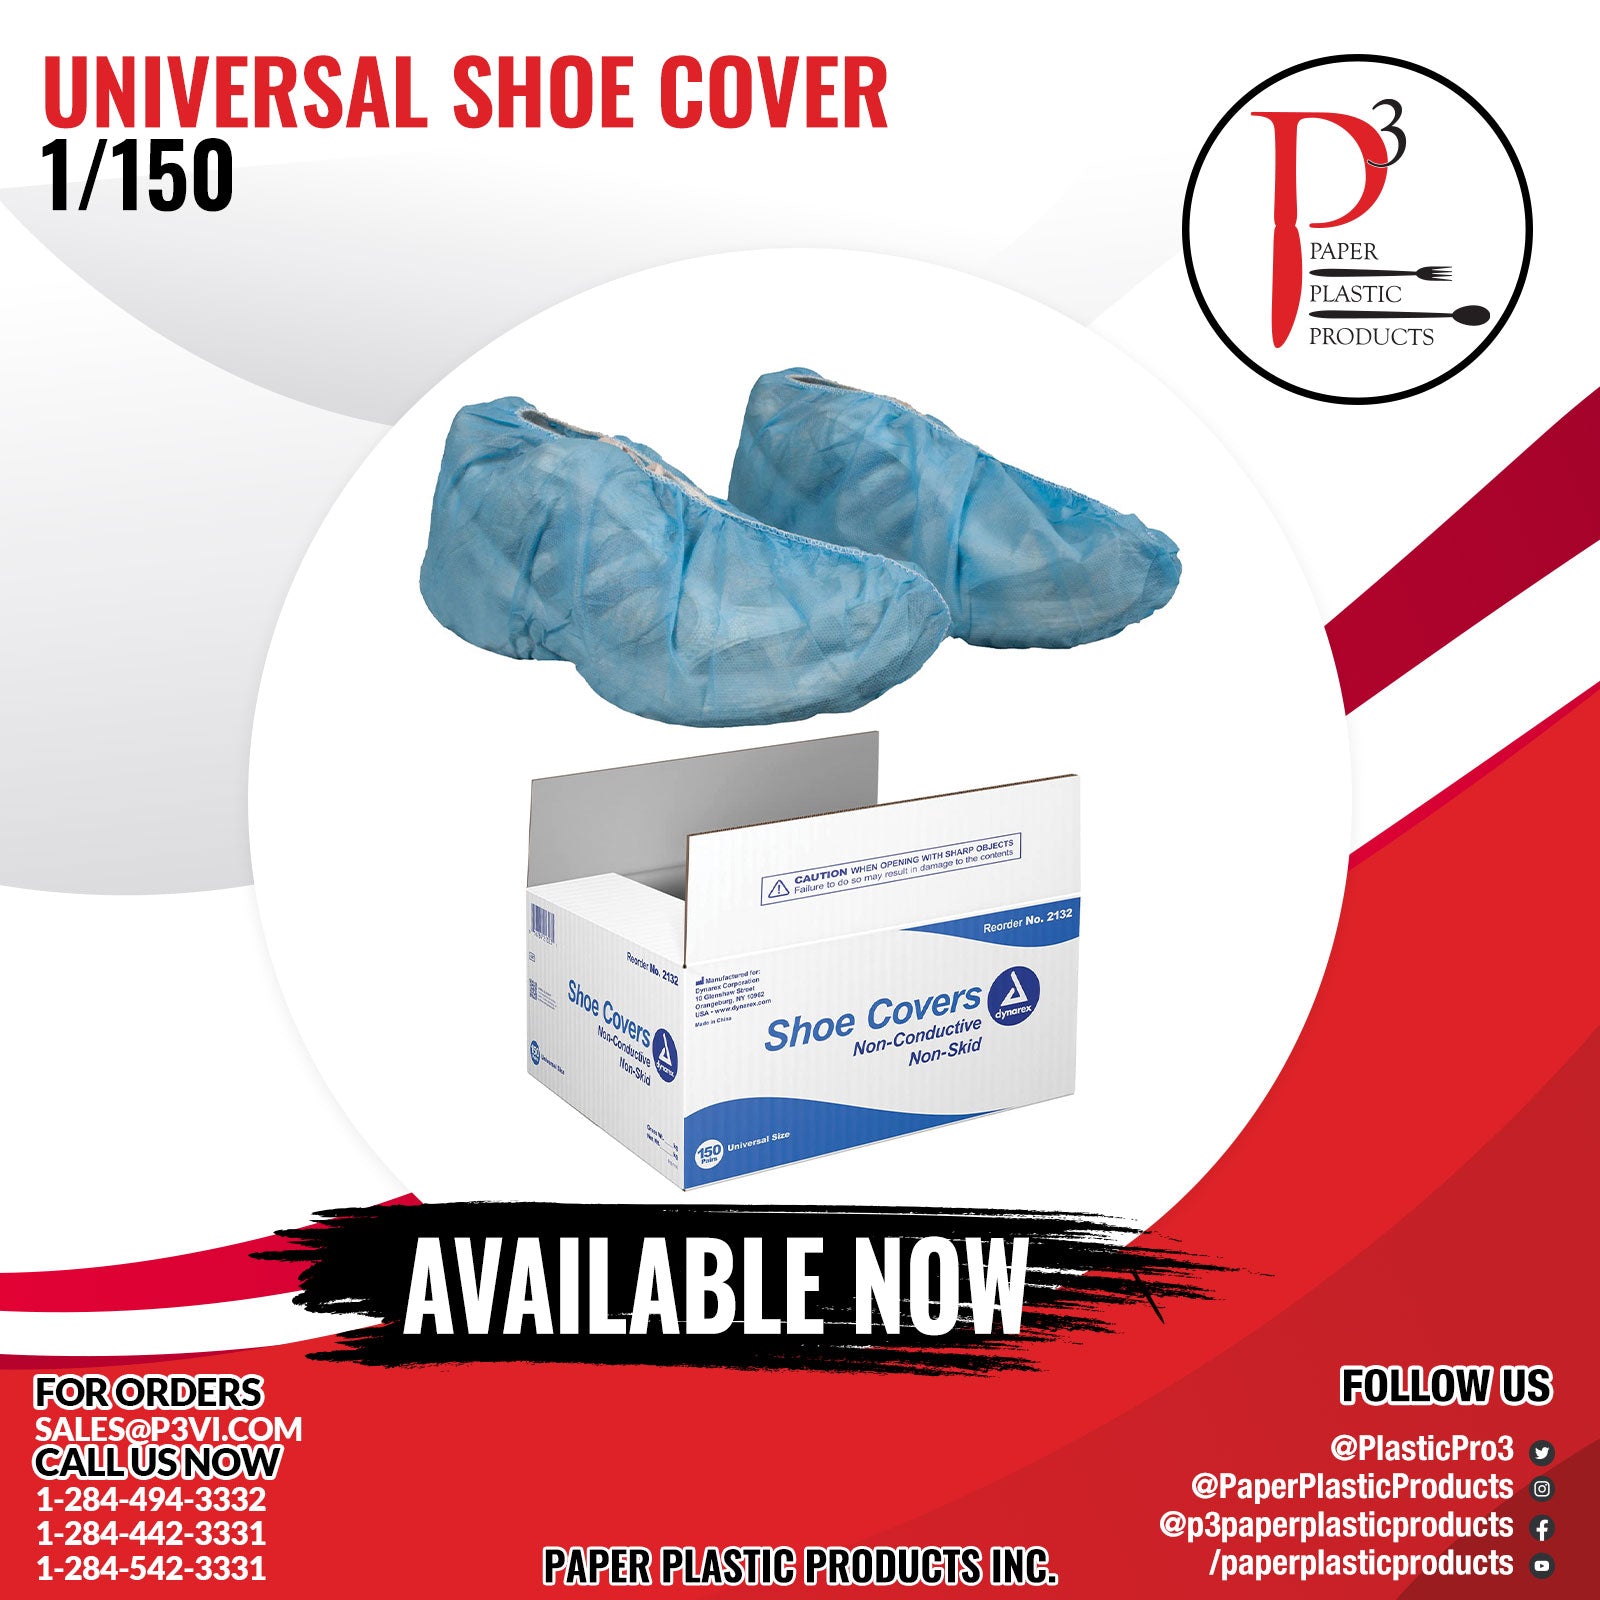 Universal Shoe Cover 1/150